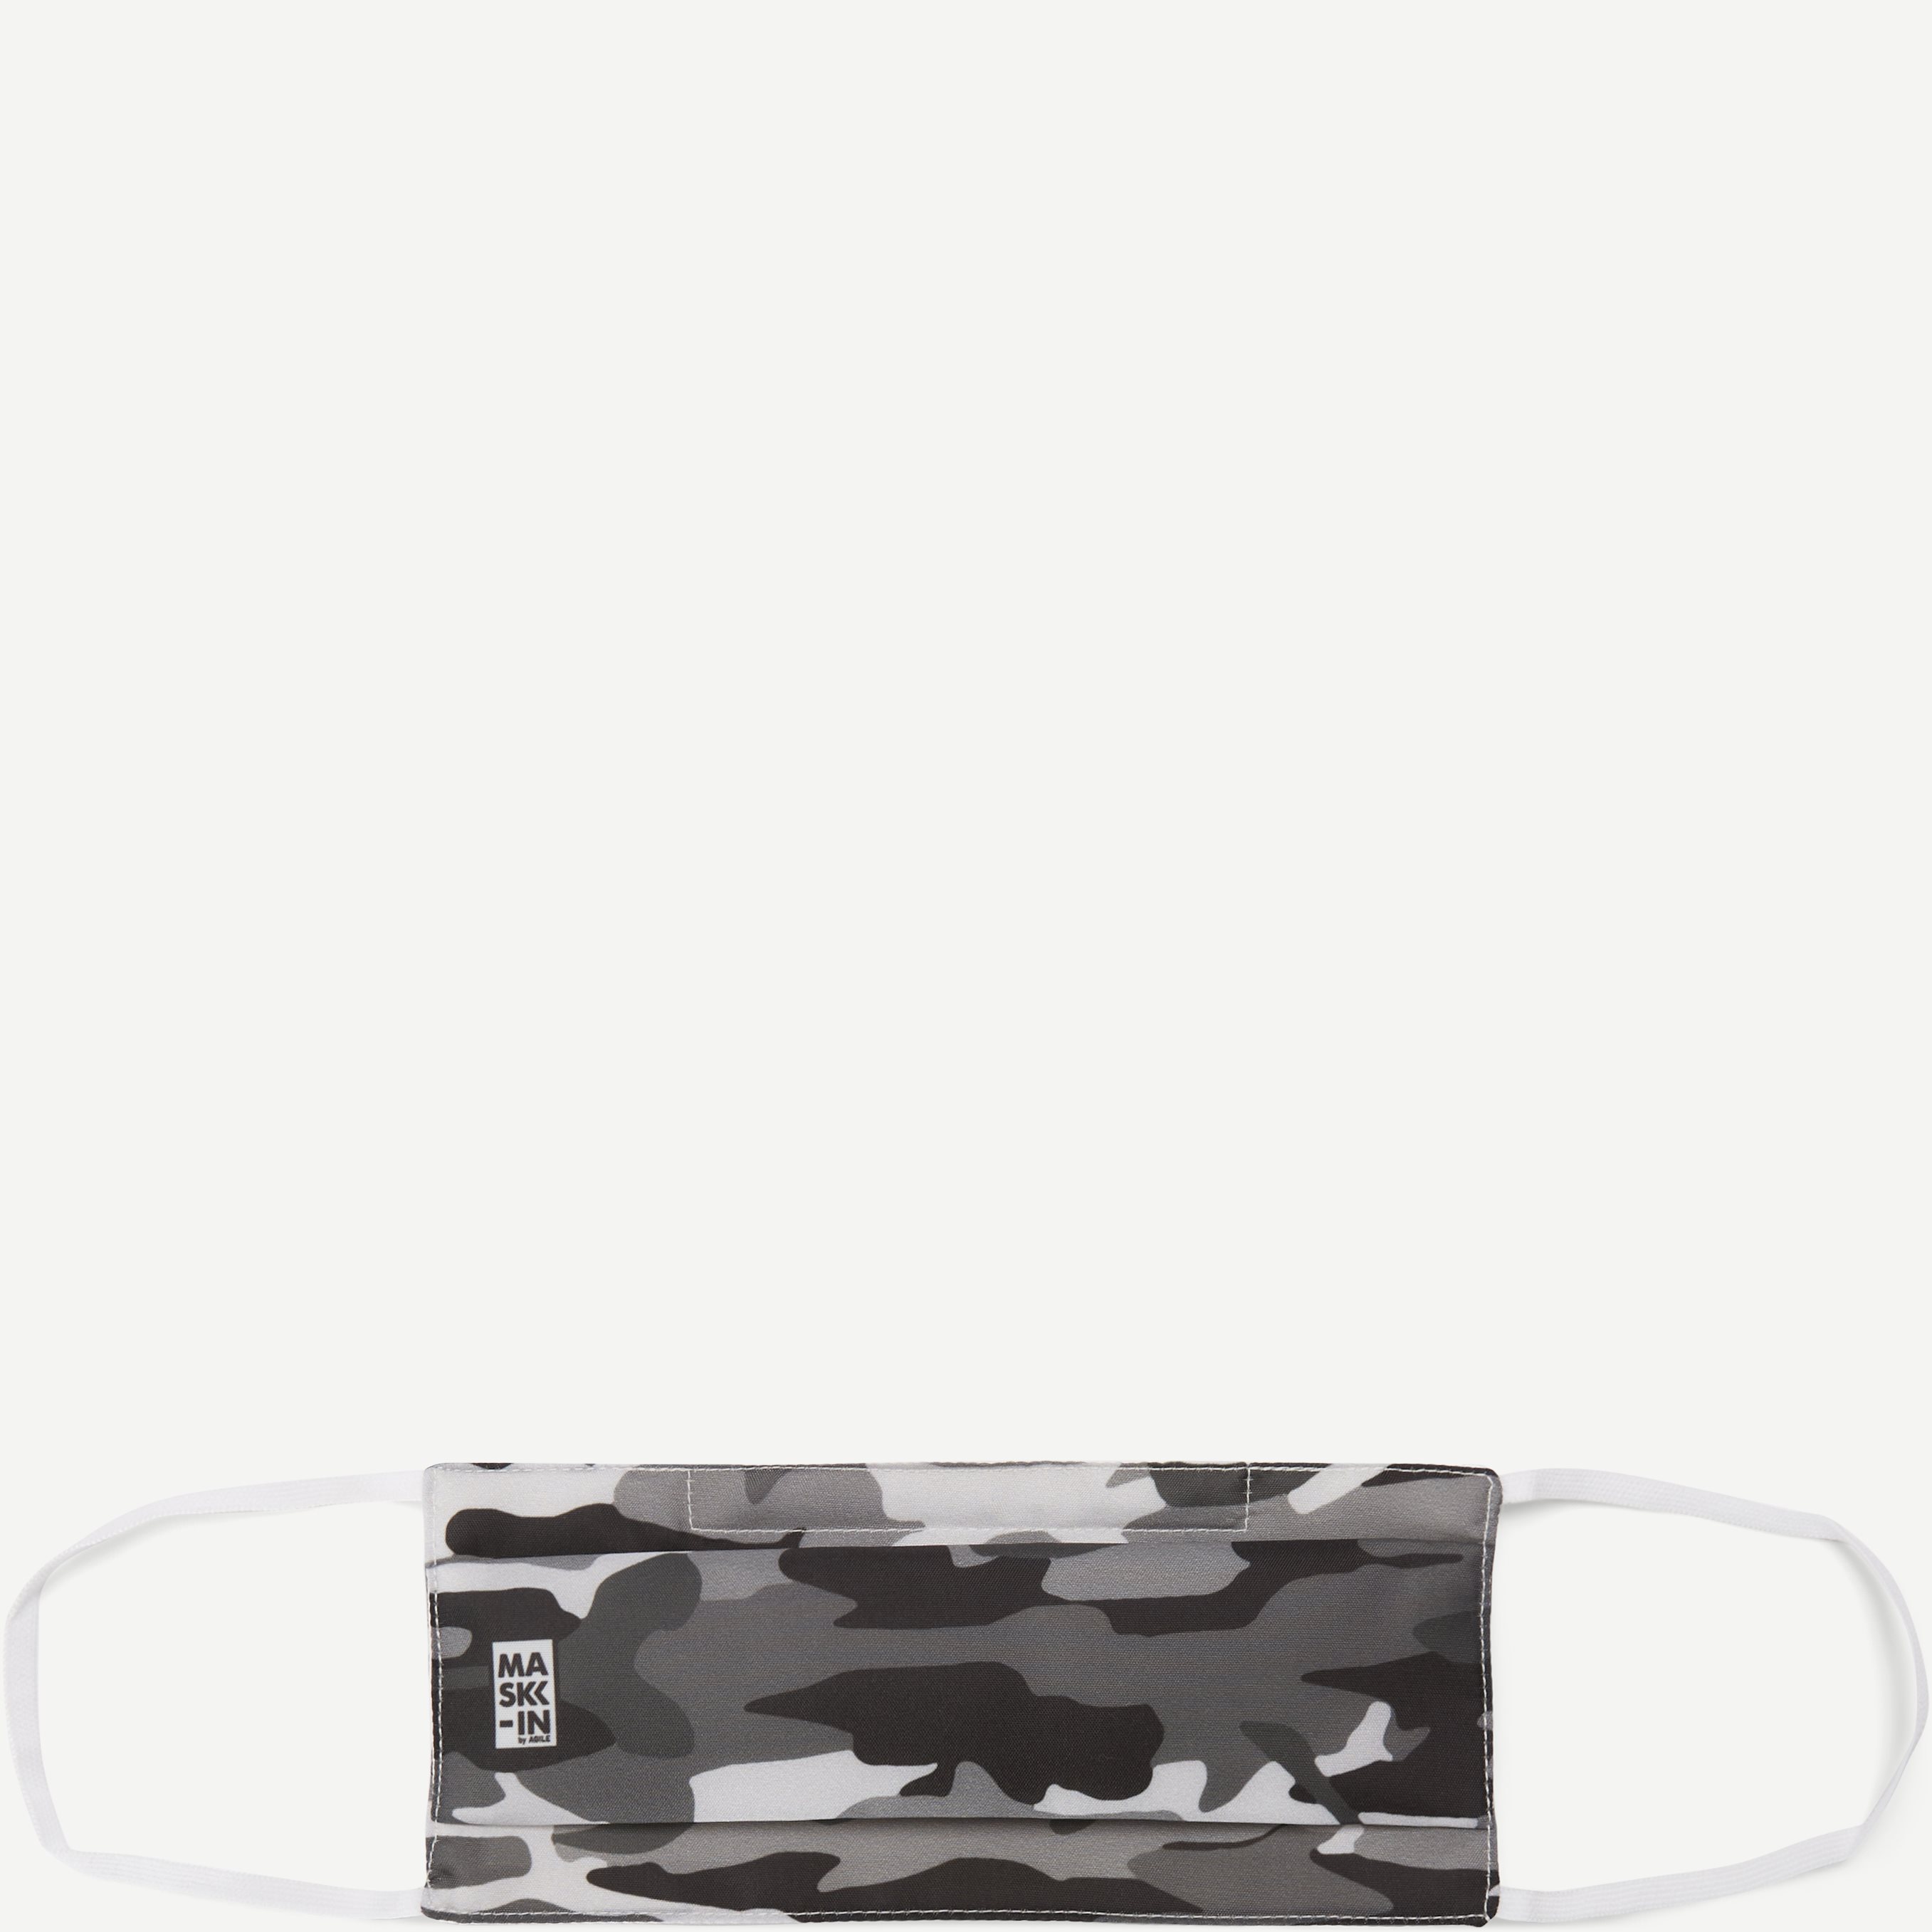 MASK-IN Accessories CAMOFLAGE Grey